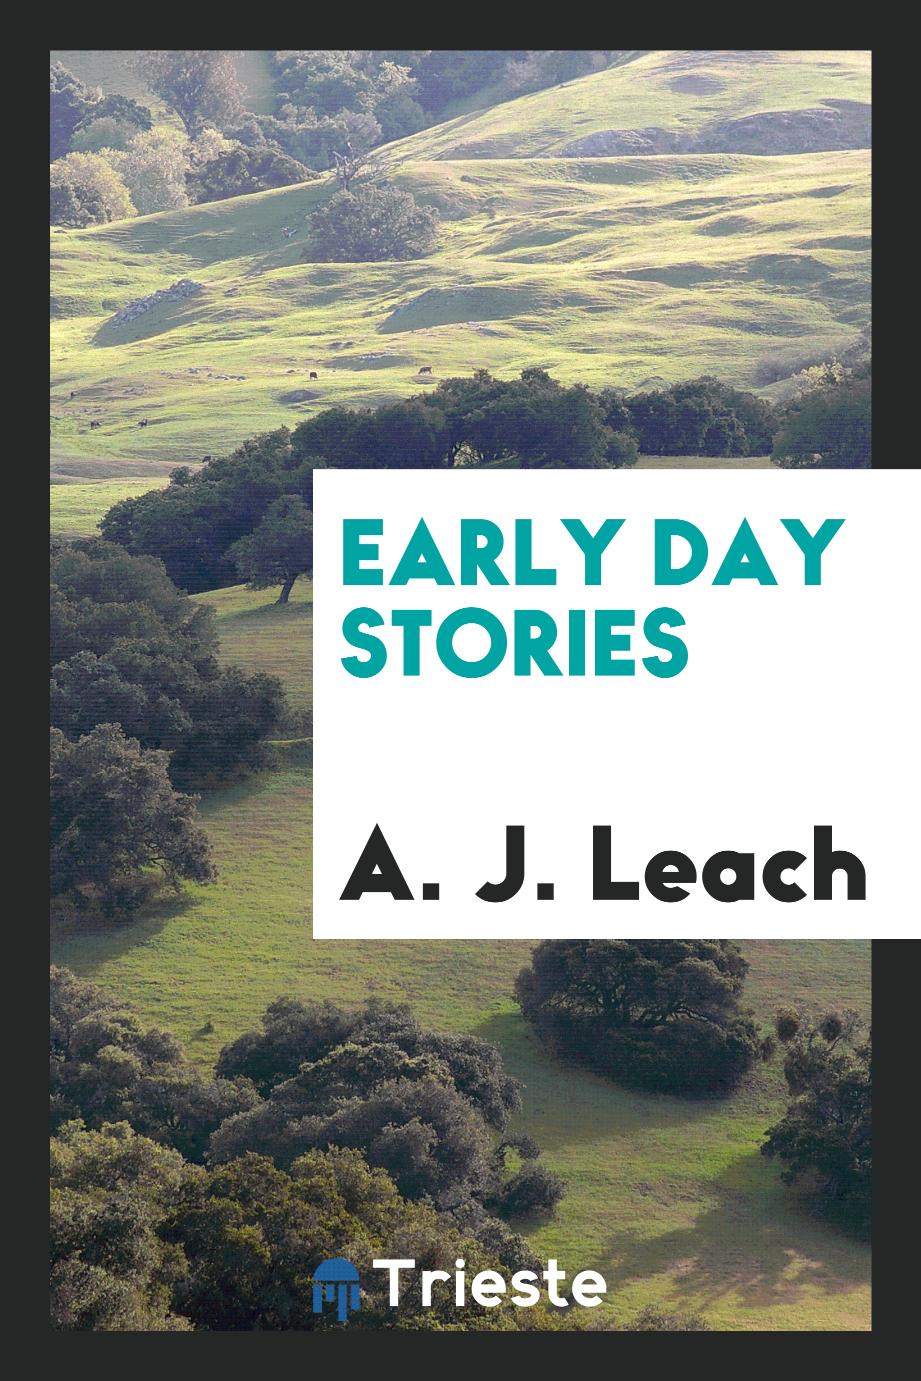 Early day stories